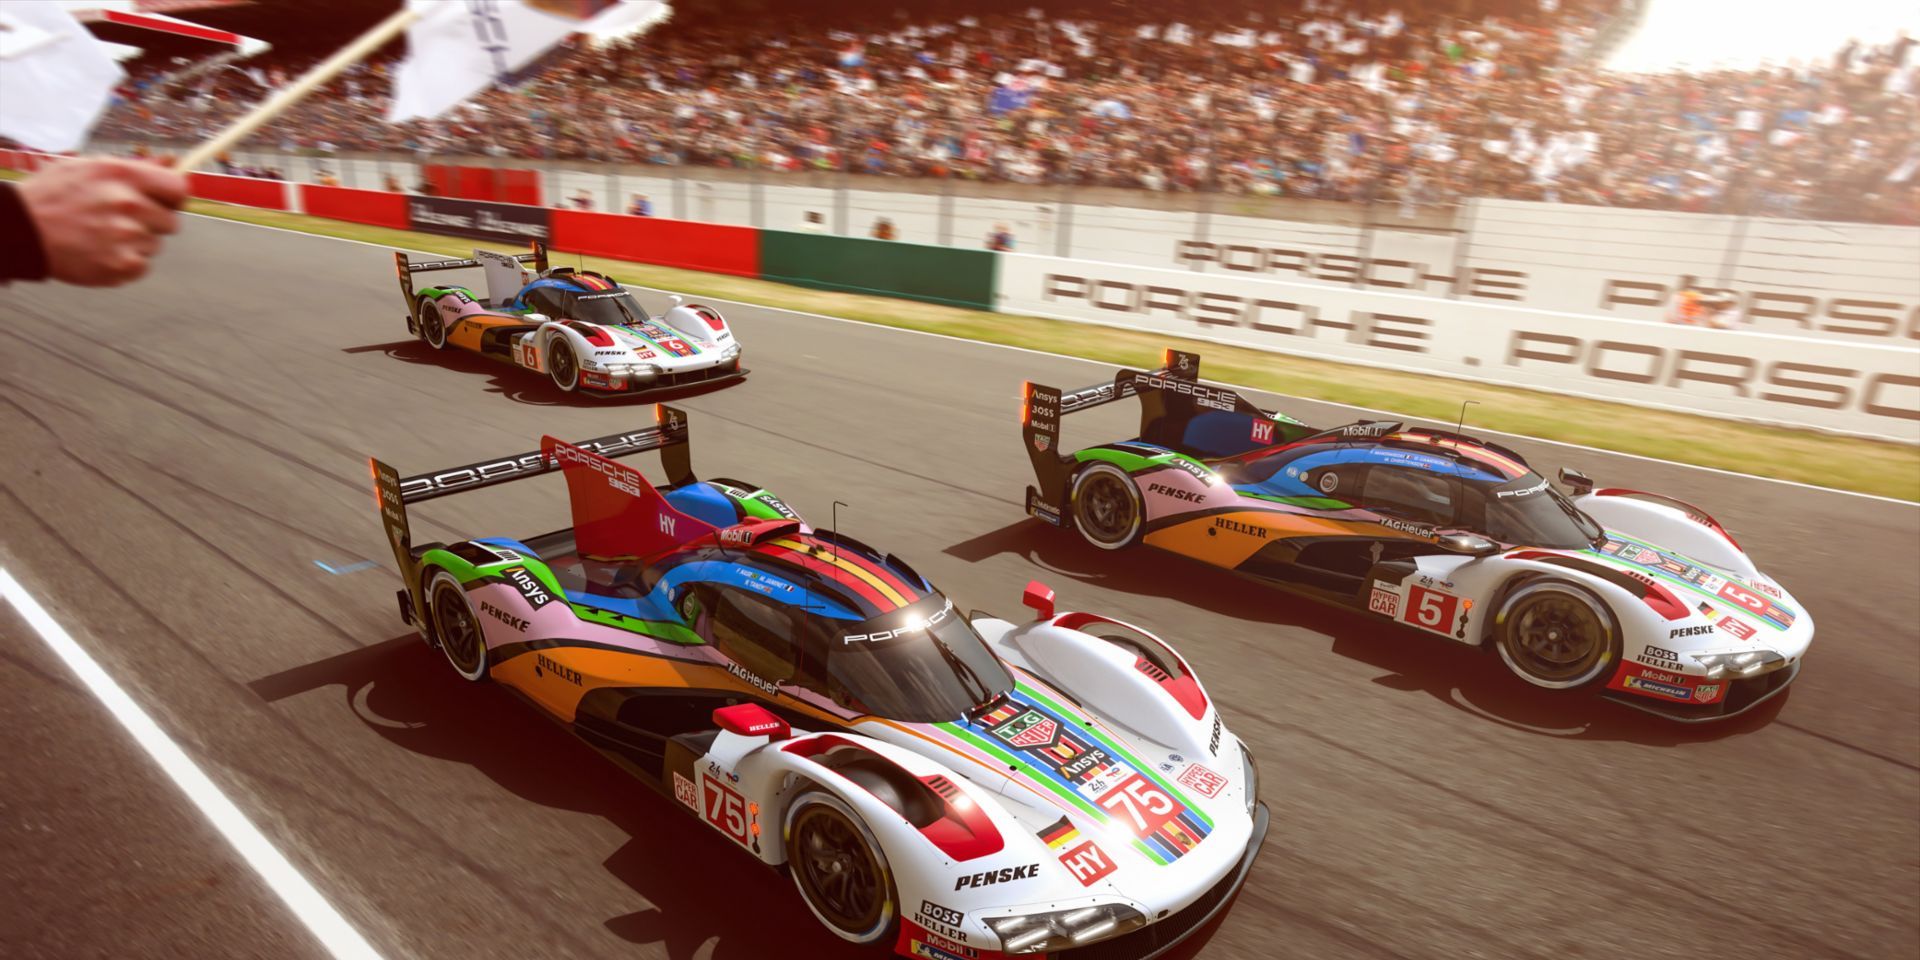 Porsche's One-Off Le Mans Liveries Will Celebrate 75 Years of History